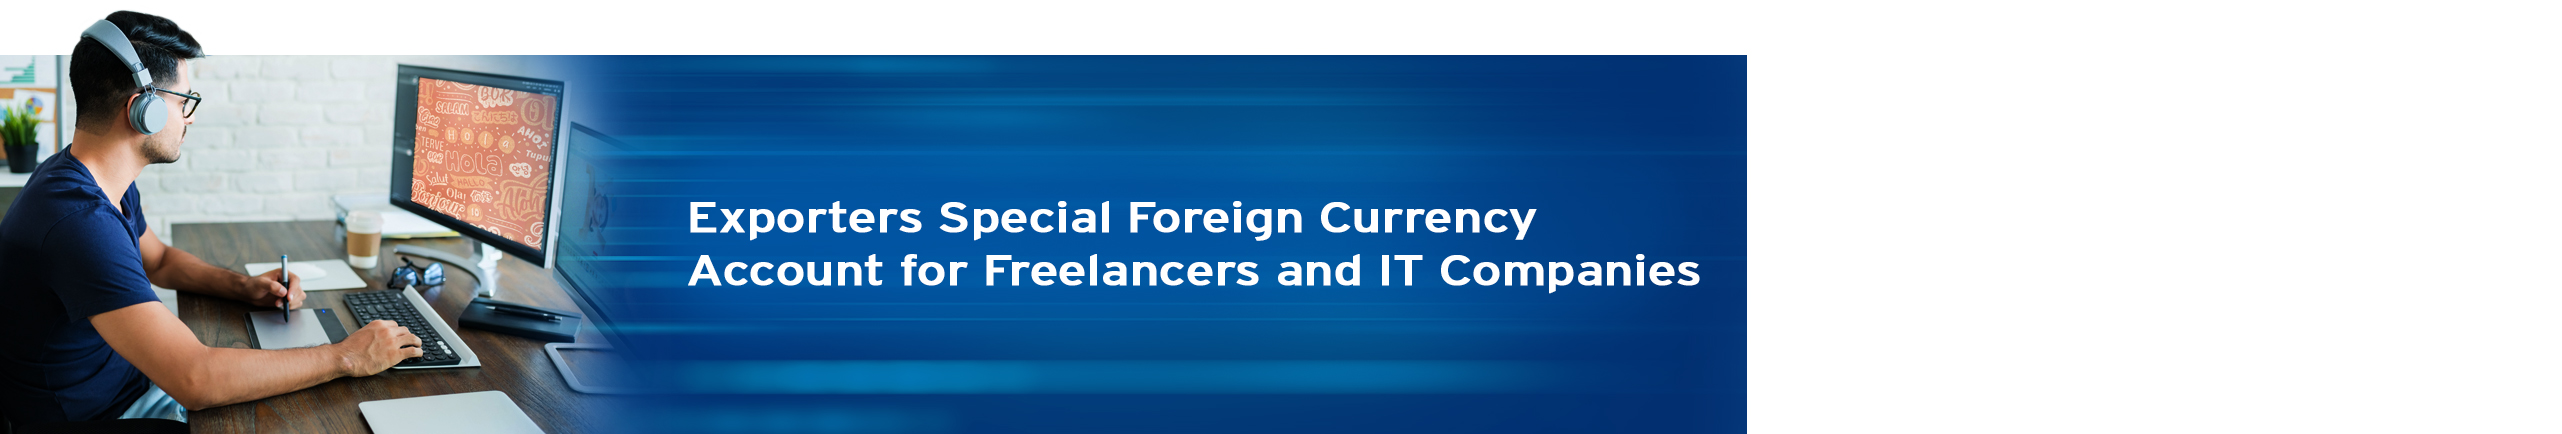 Exporters Special Foreign Currency Account for Freelancers and IT Companies